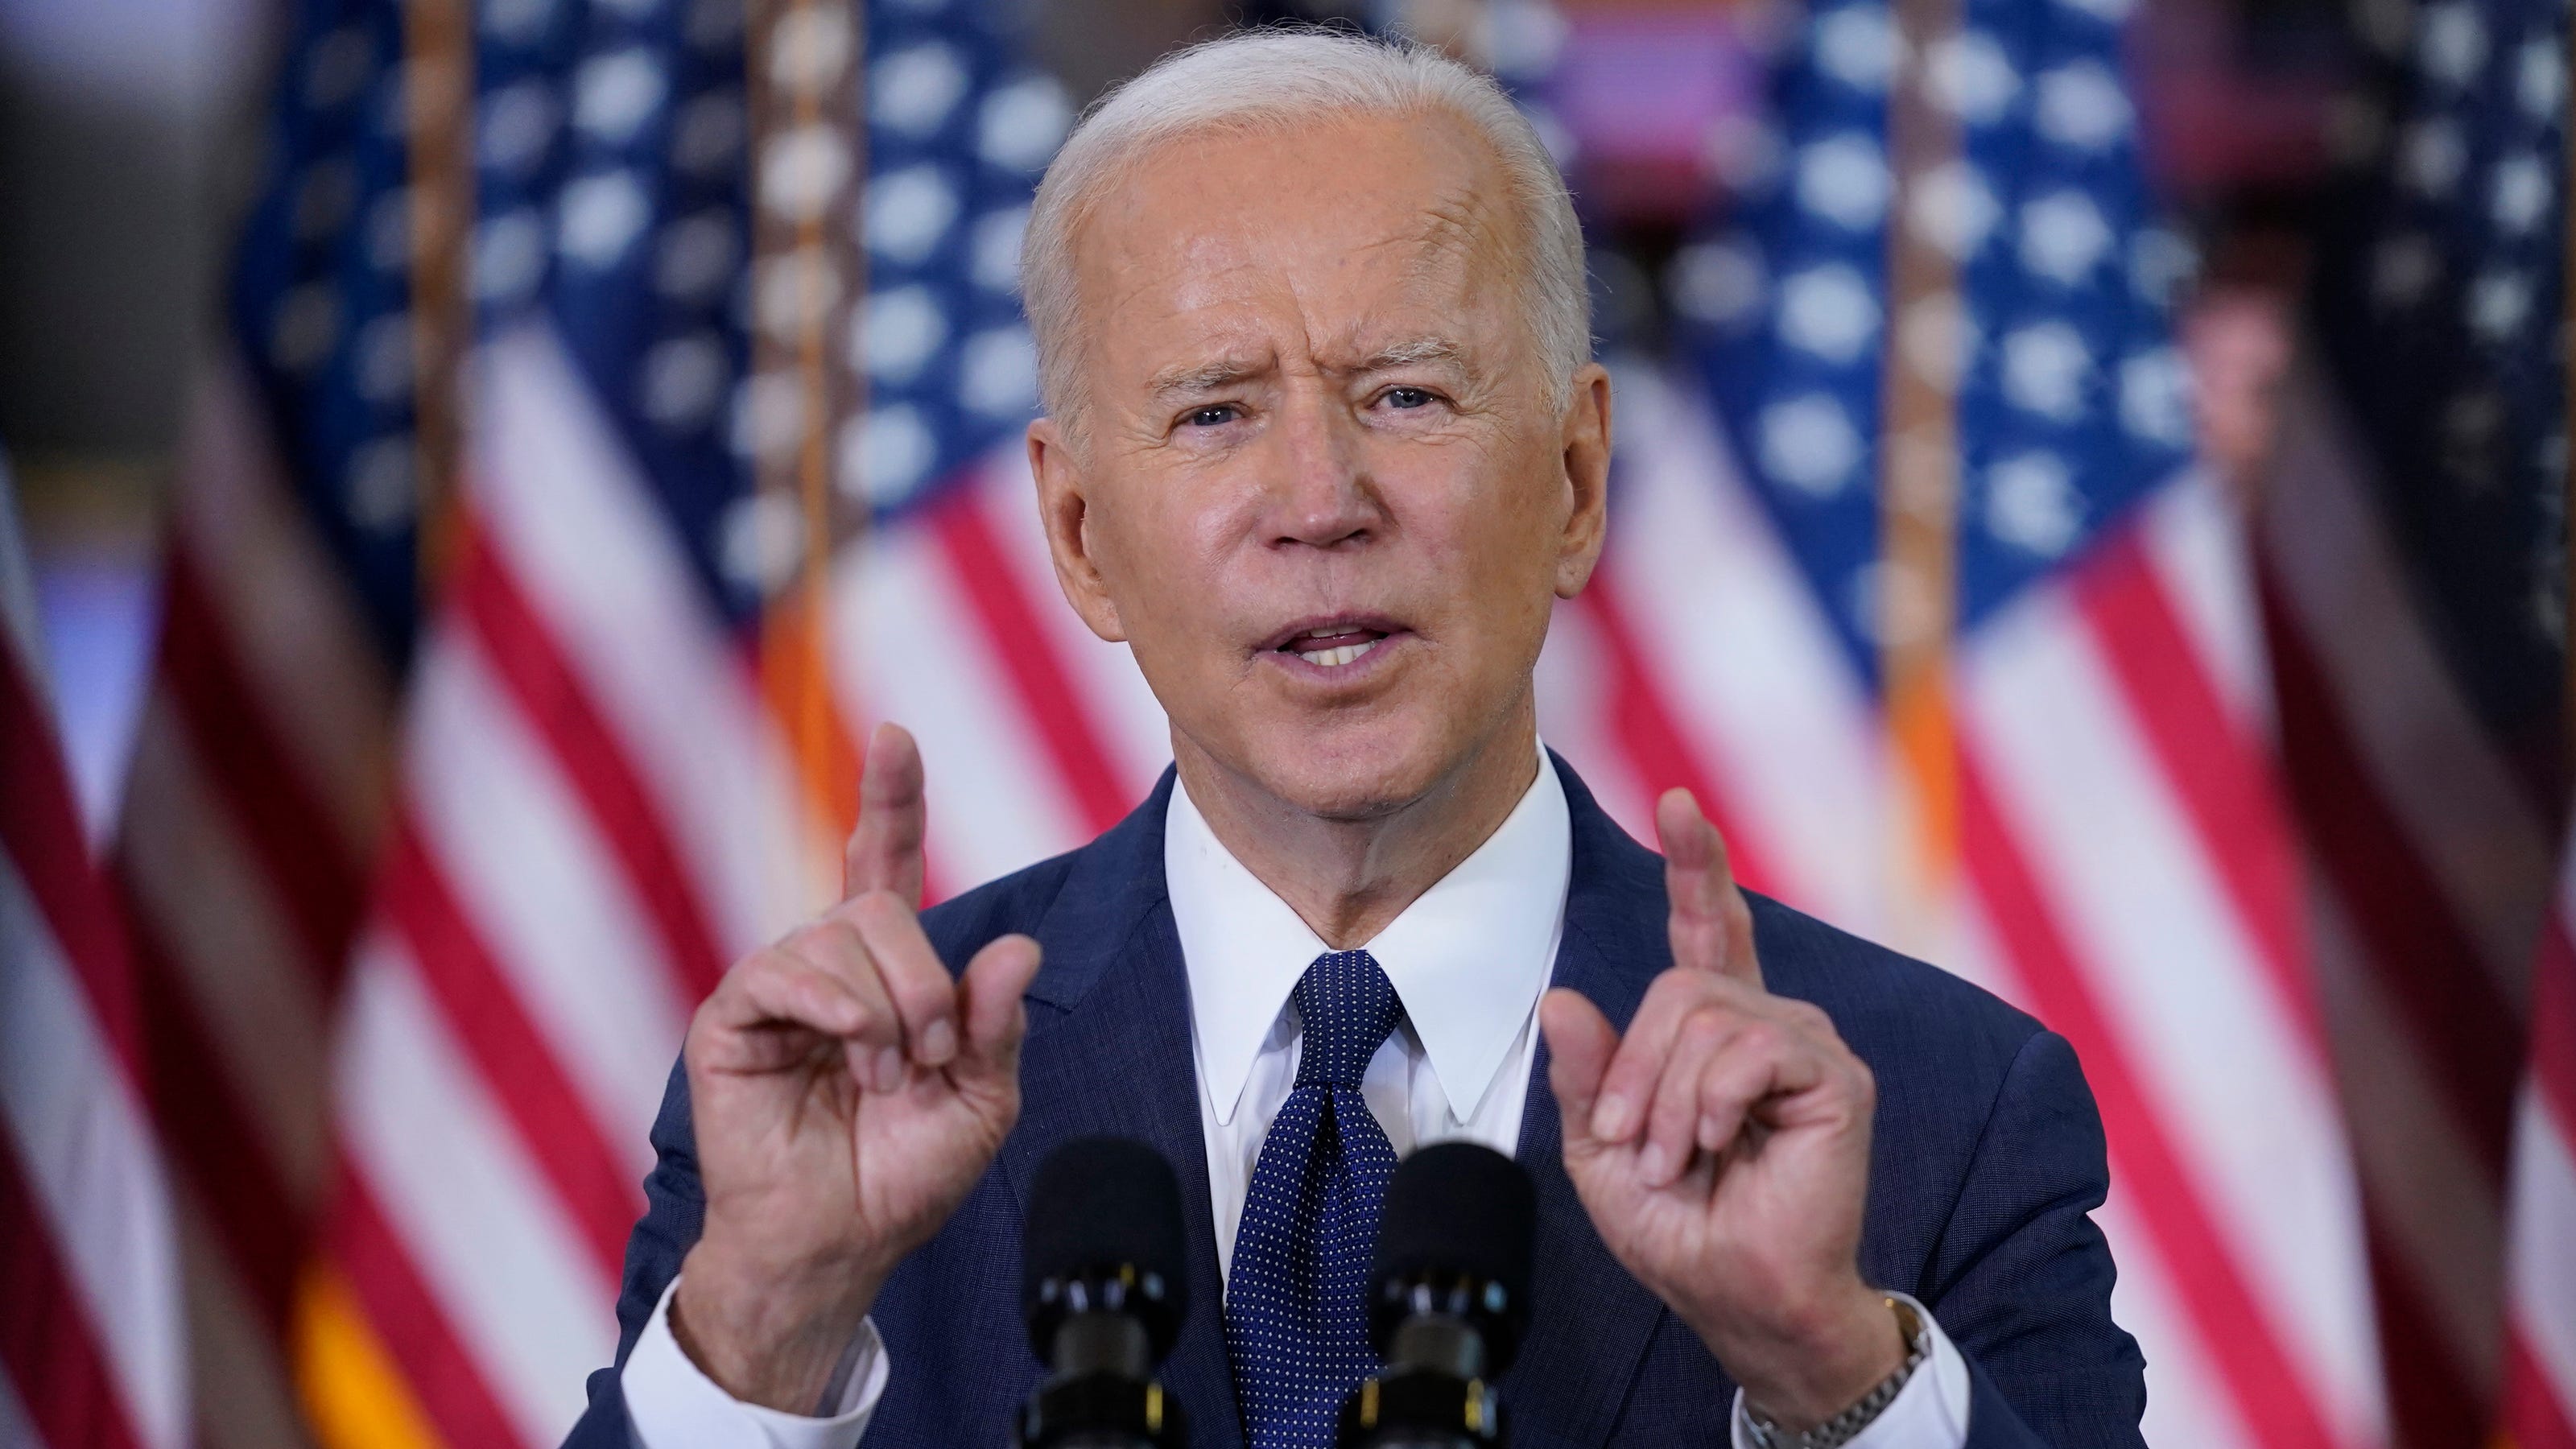 Fact check Joe Biden's approval rating isn't lowest in history